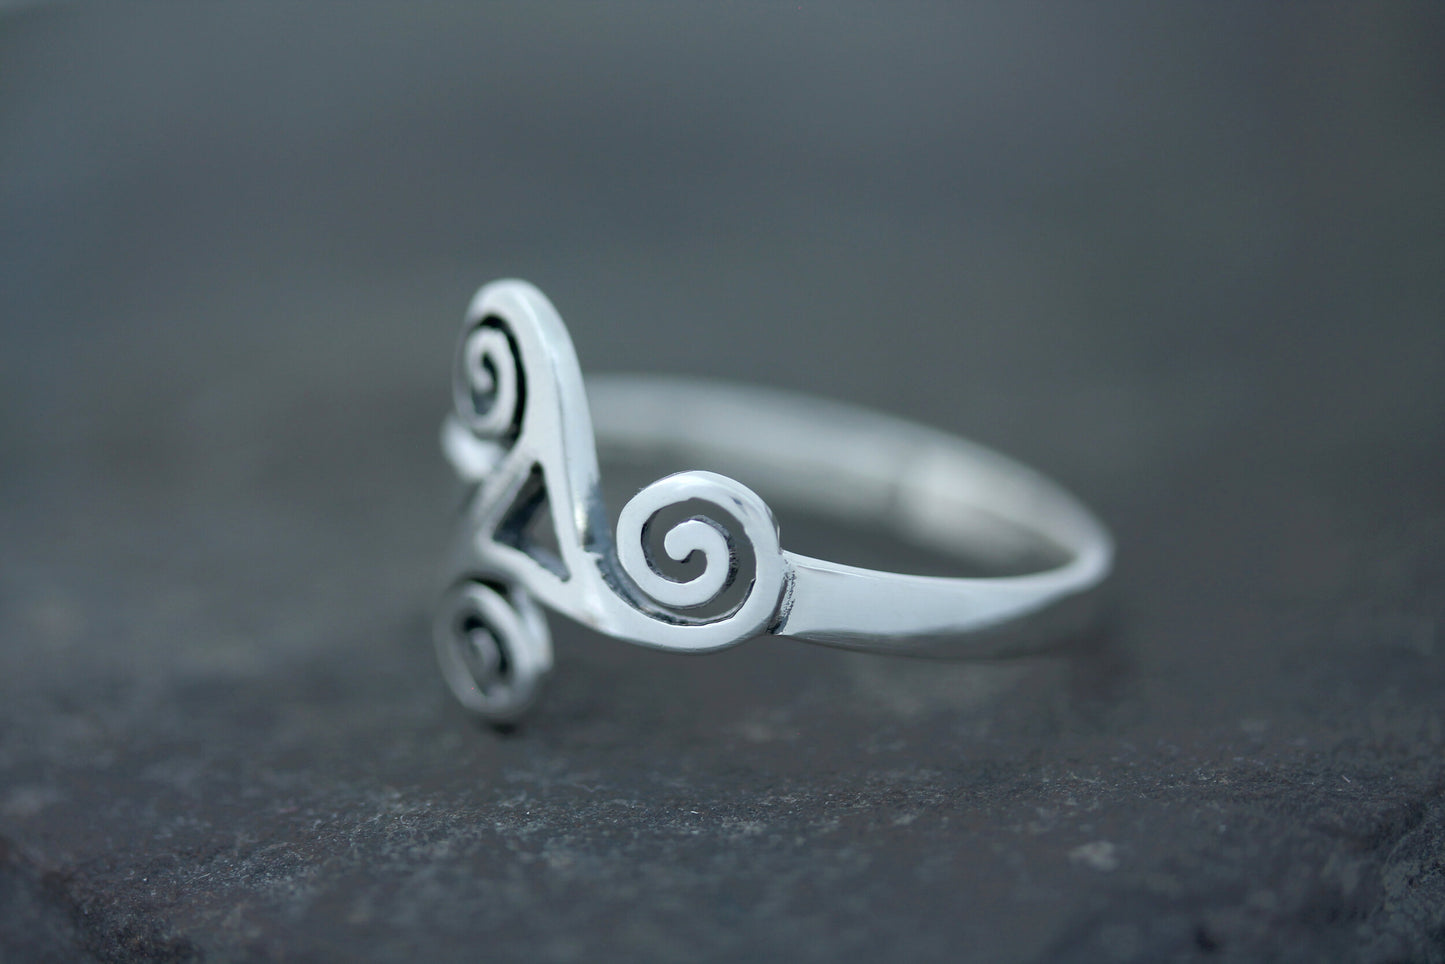 Triskele Ring - Triple Spiral with Window